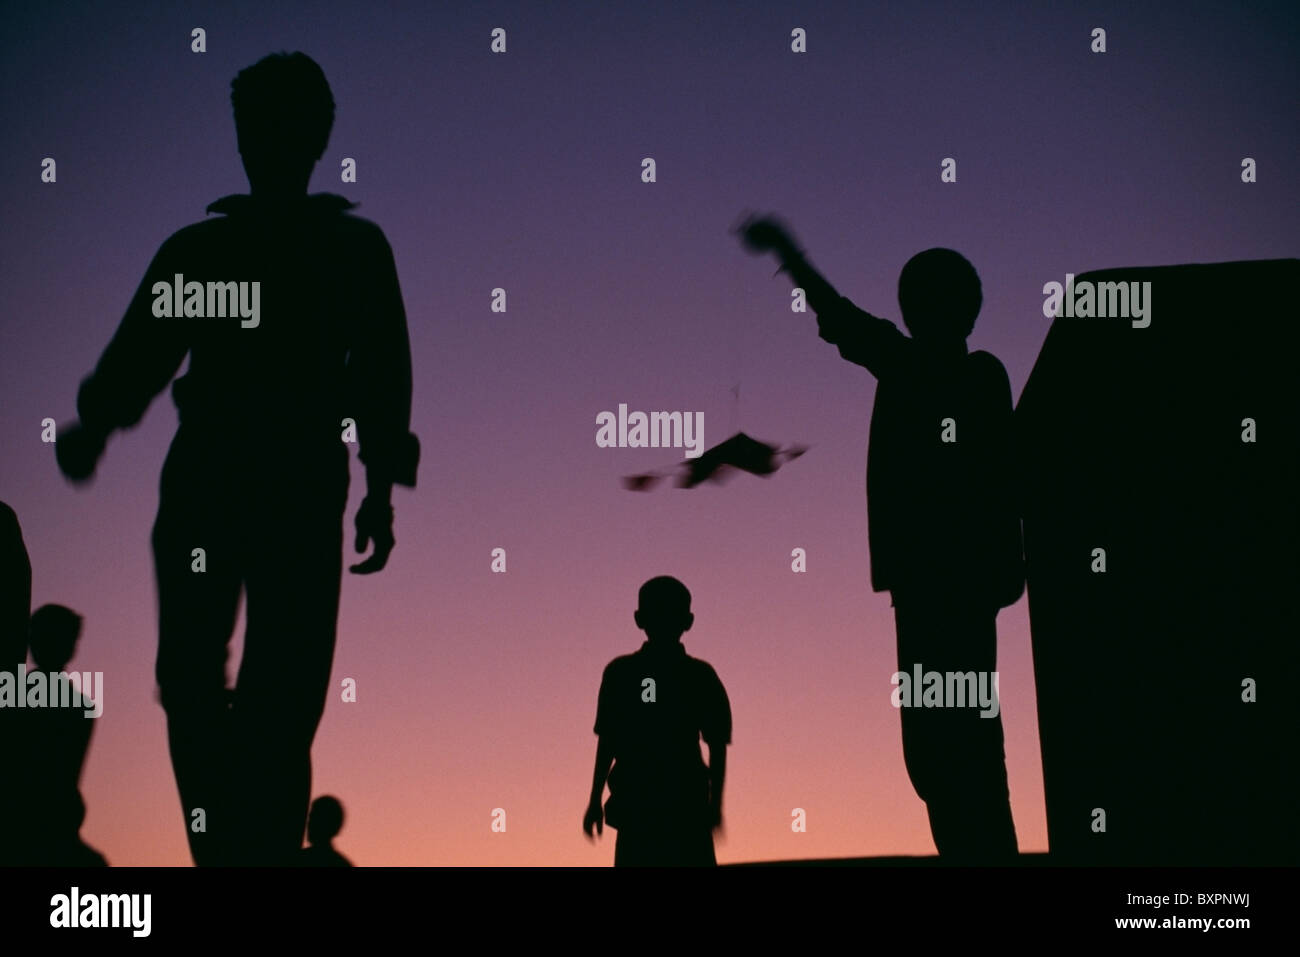 Silhouettes Of People Flying Kites Stock Photo